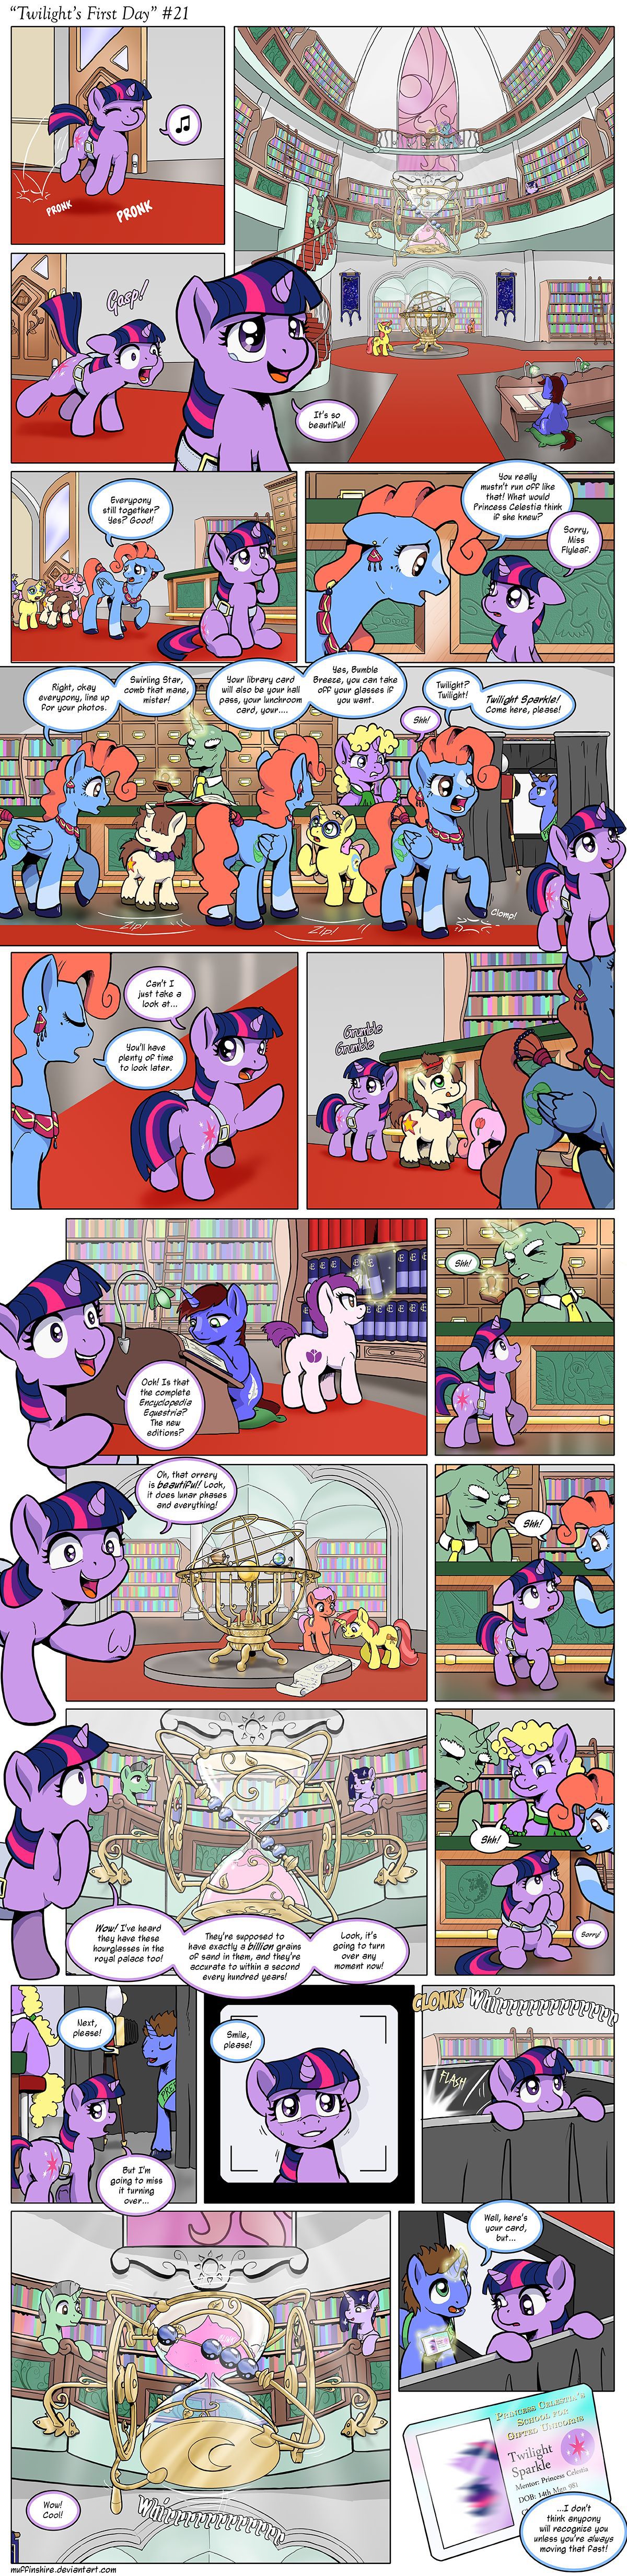 [Muffinshire] Twilight's First Day (My Little Pony: Friendship is Magic) [English] 21